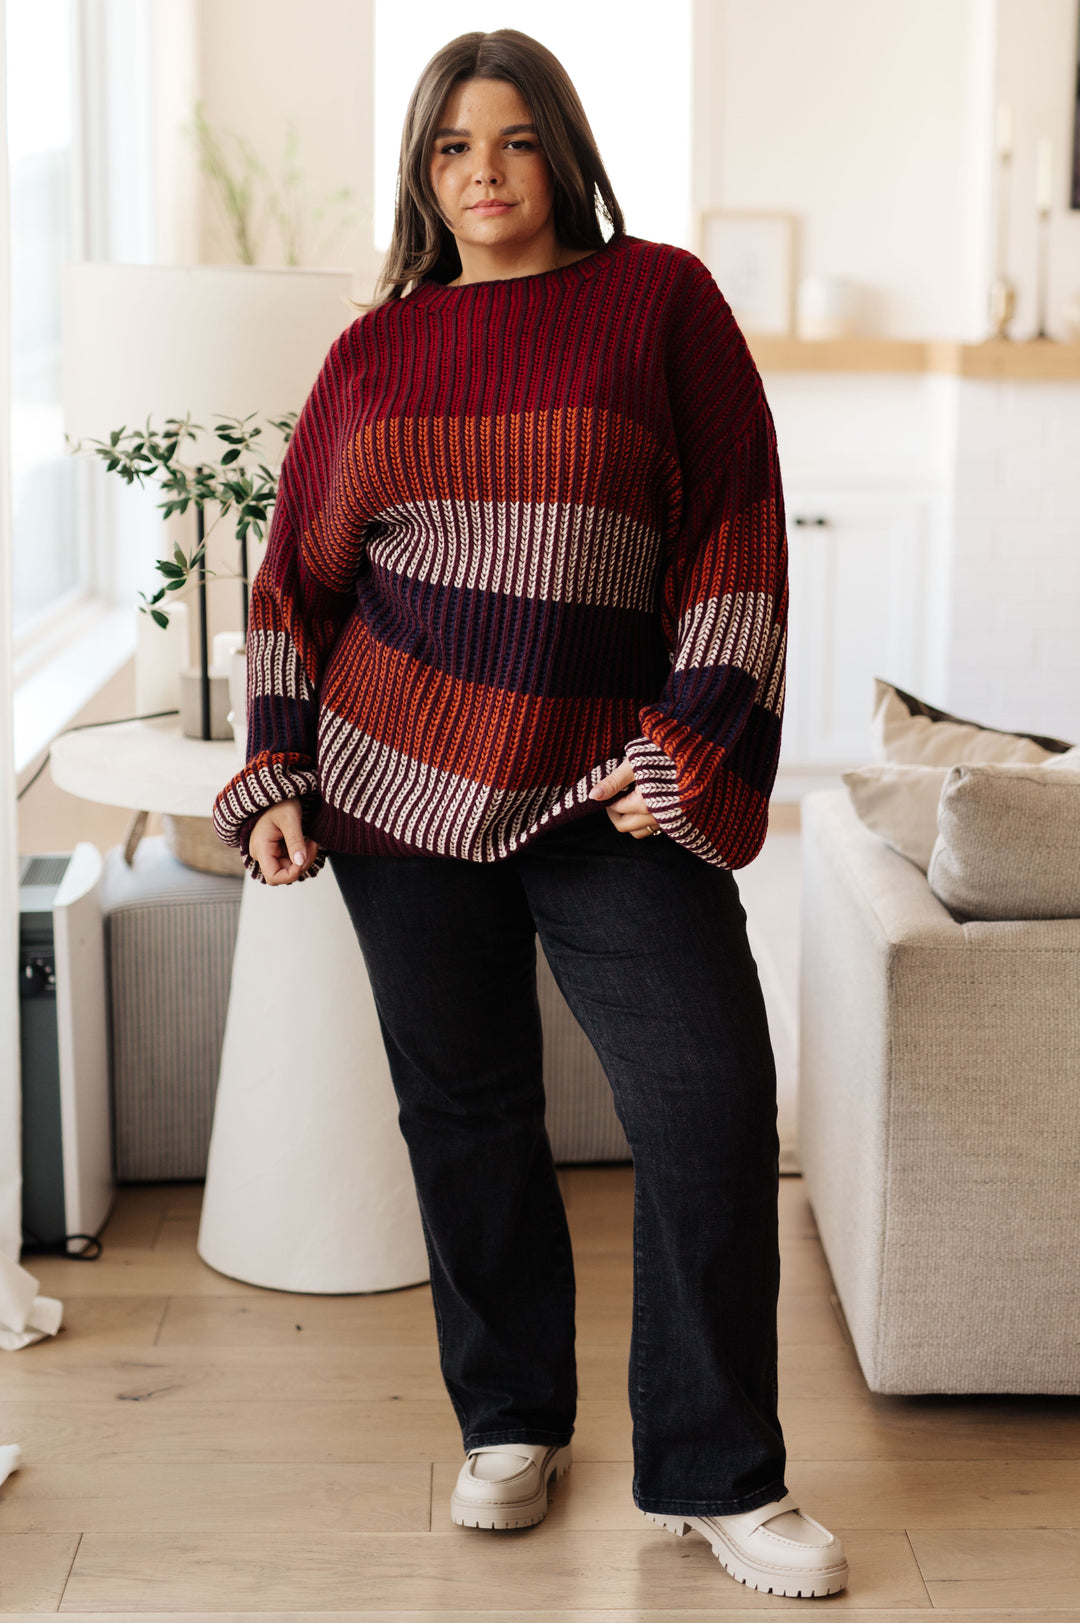 World of Wonder Striped Sweater-Sweaters/Sweatshirts-Inspired by Justeen-Women's Clothing Boutique in Chicago, Illinois